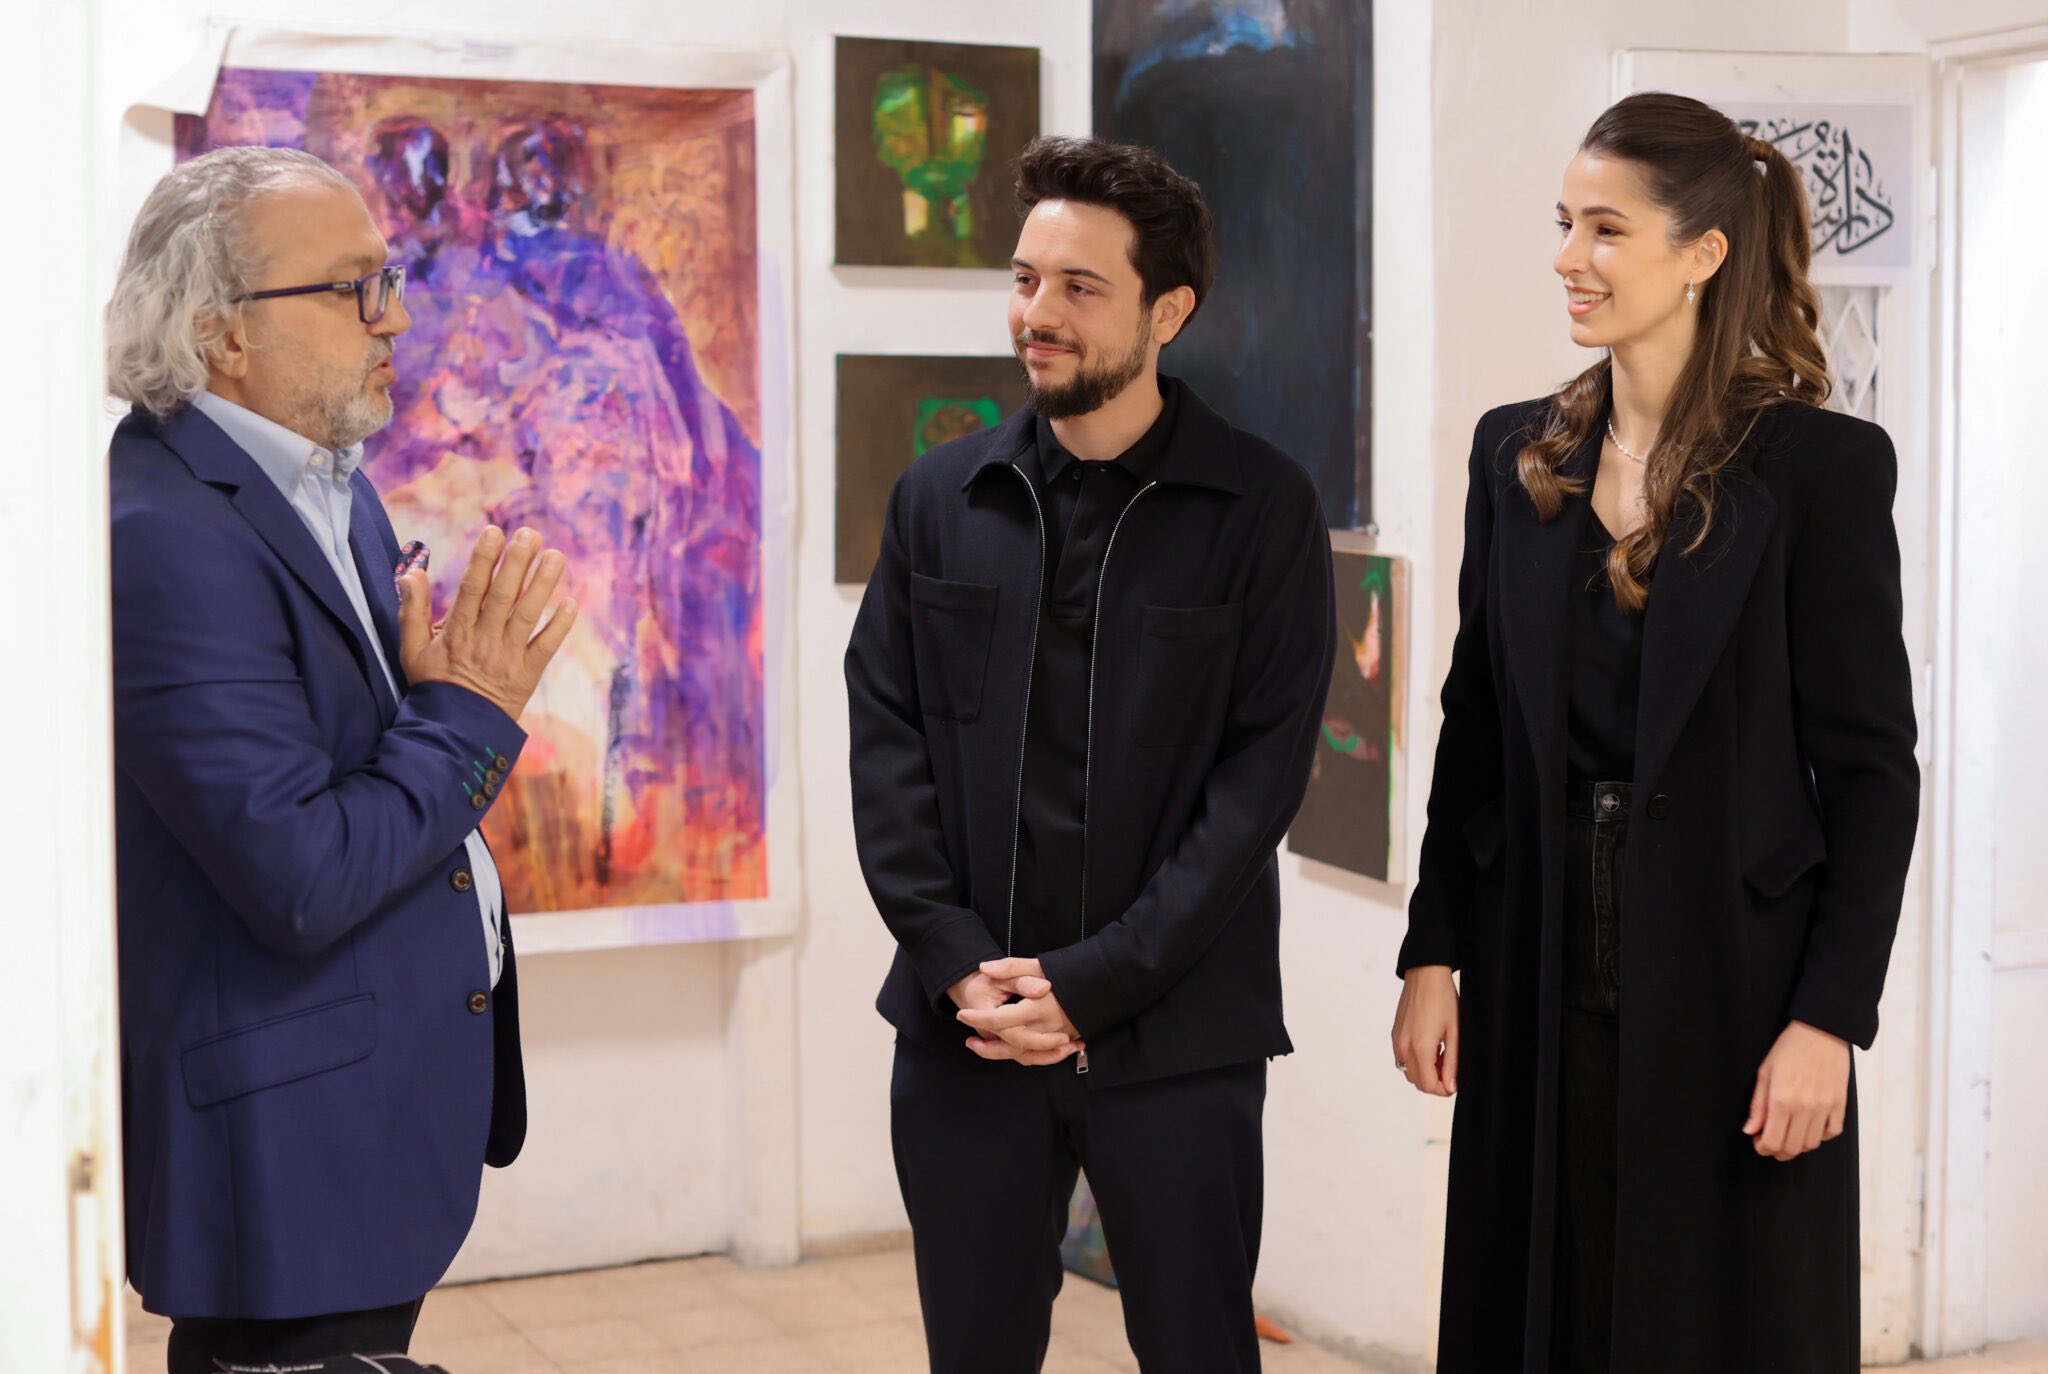 Another joint engagement for Prince Al Hussein of Jordan and his fiancée Rajwa Al-Saif